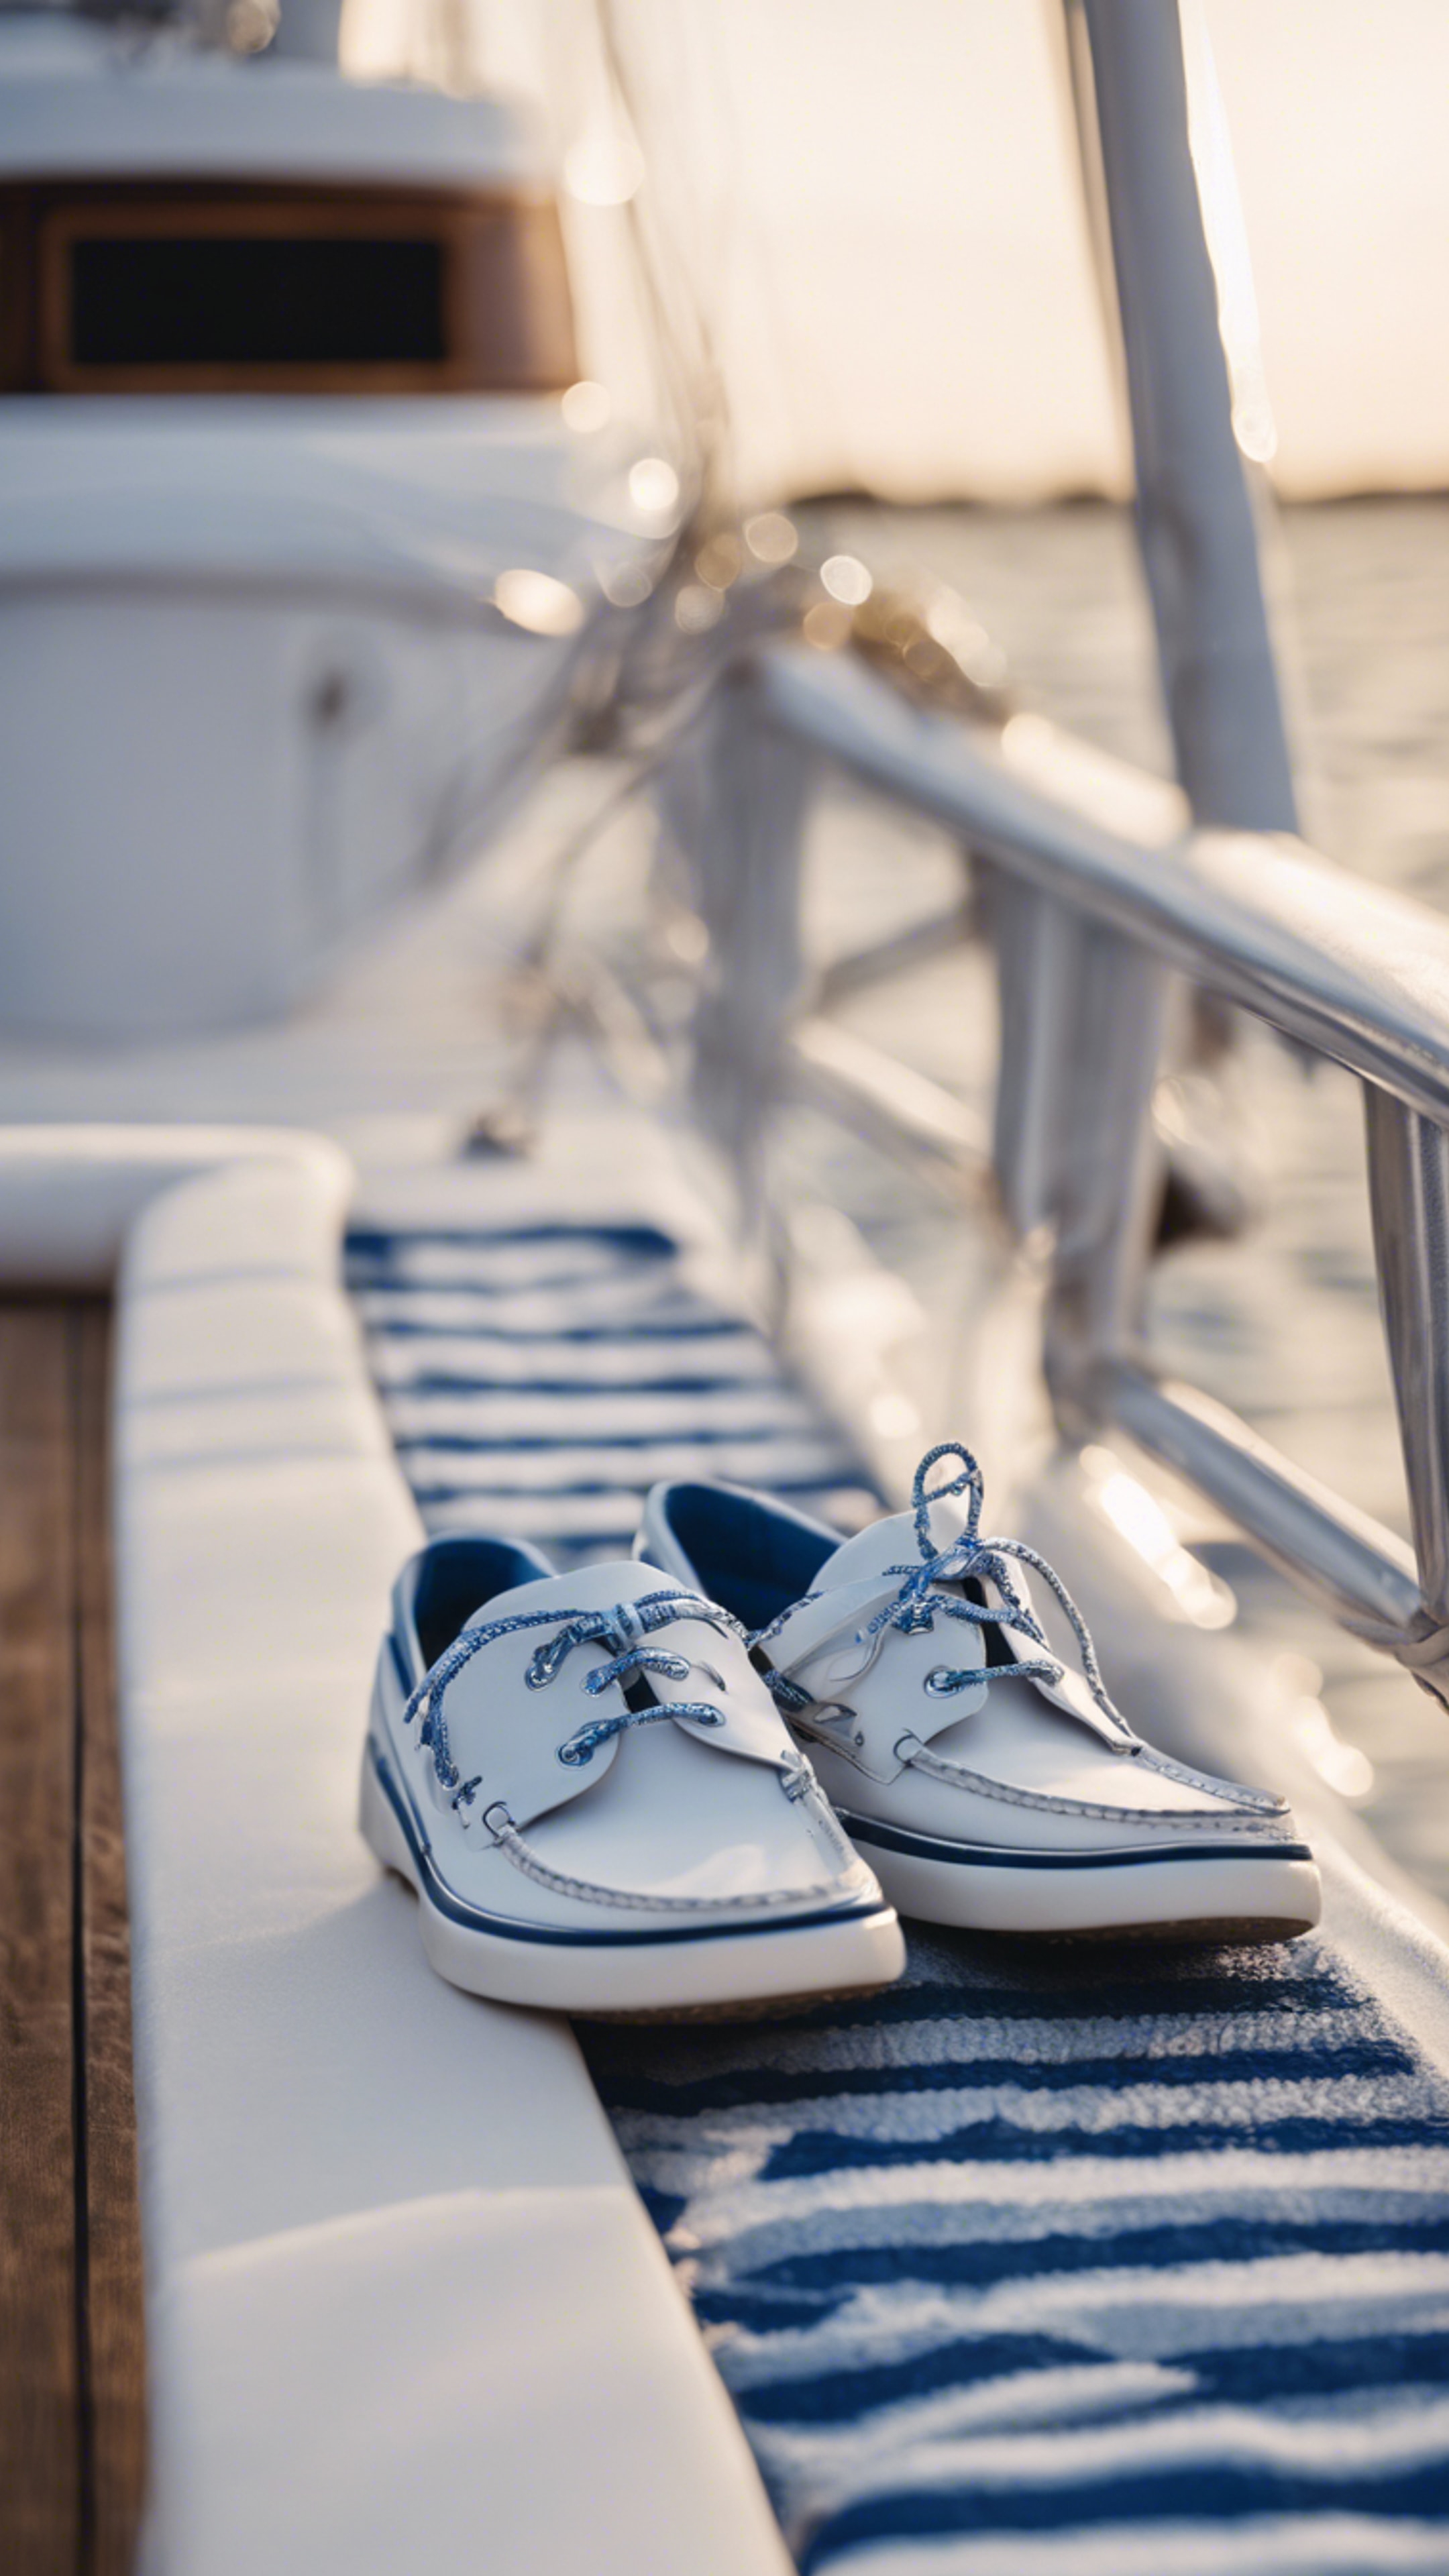 A pair of blue and white boat shoes resting on a yacht deck, reflecting preppy fashion. Tapet[e5e4a620cbd541dd8bee]